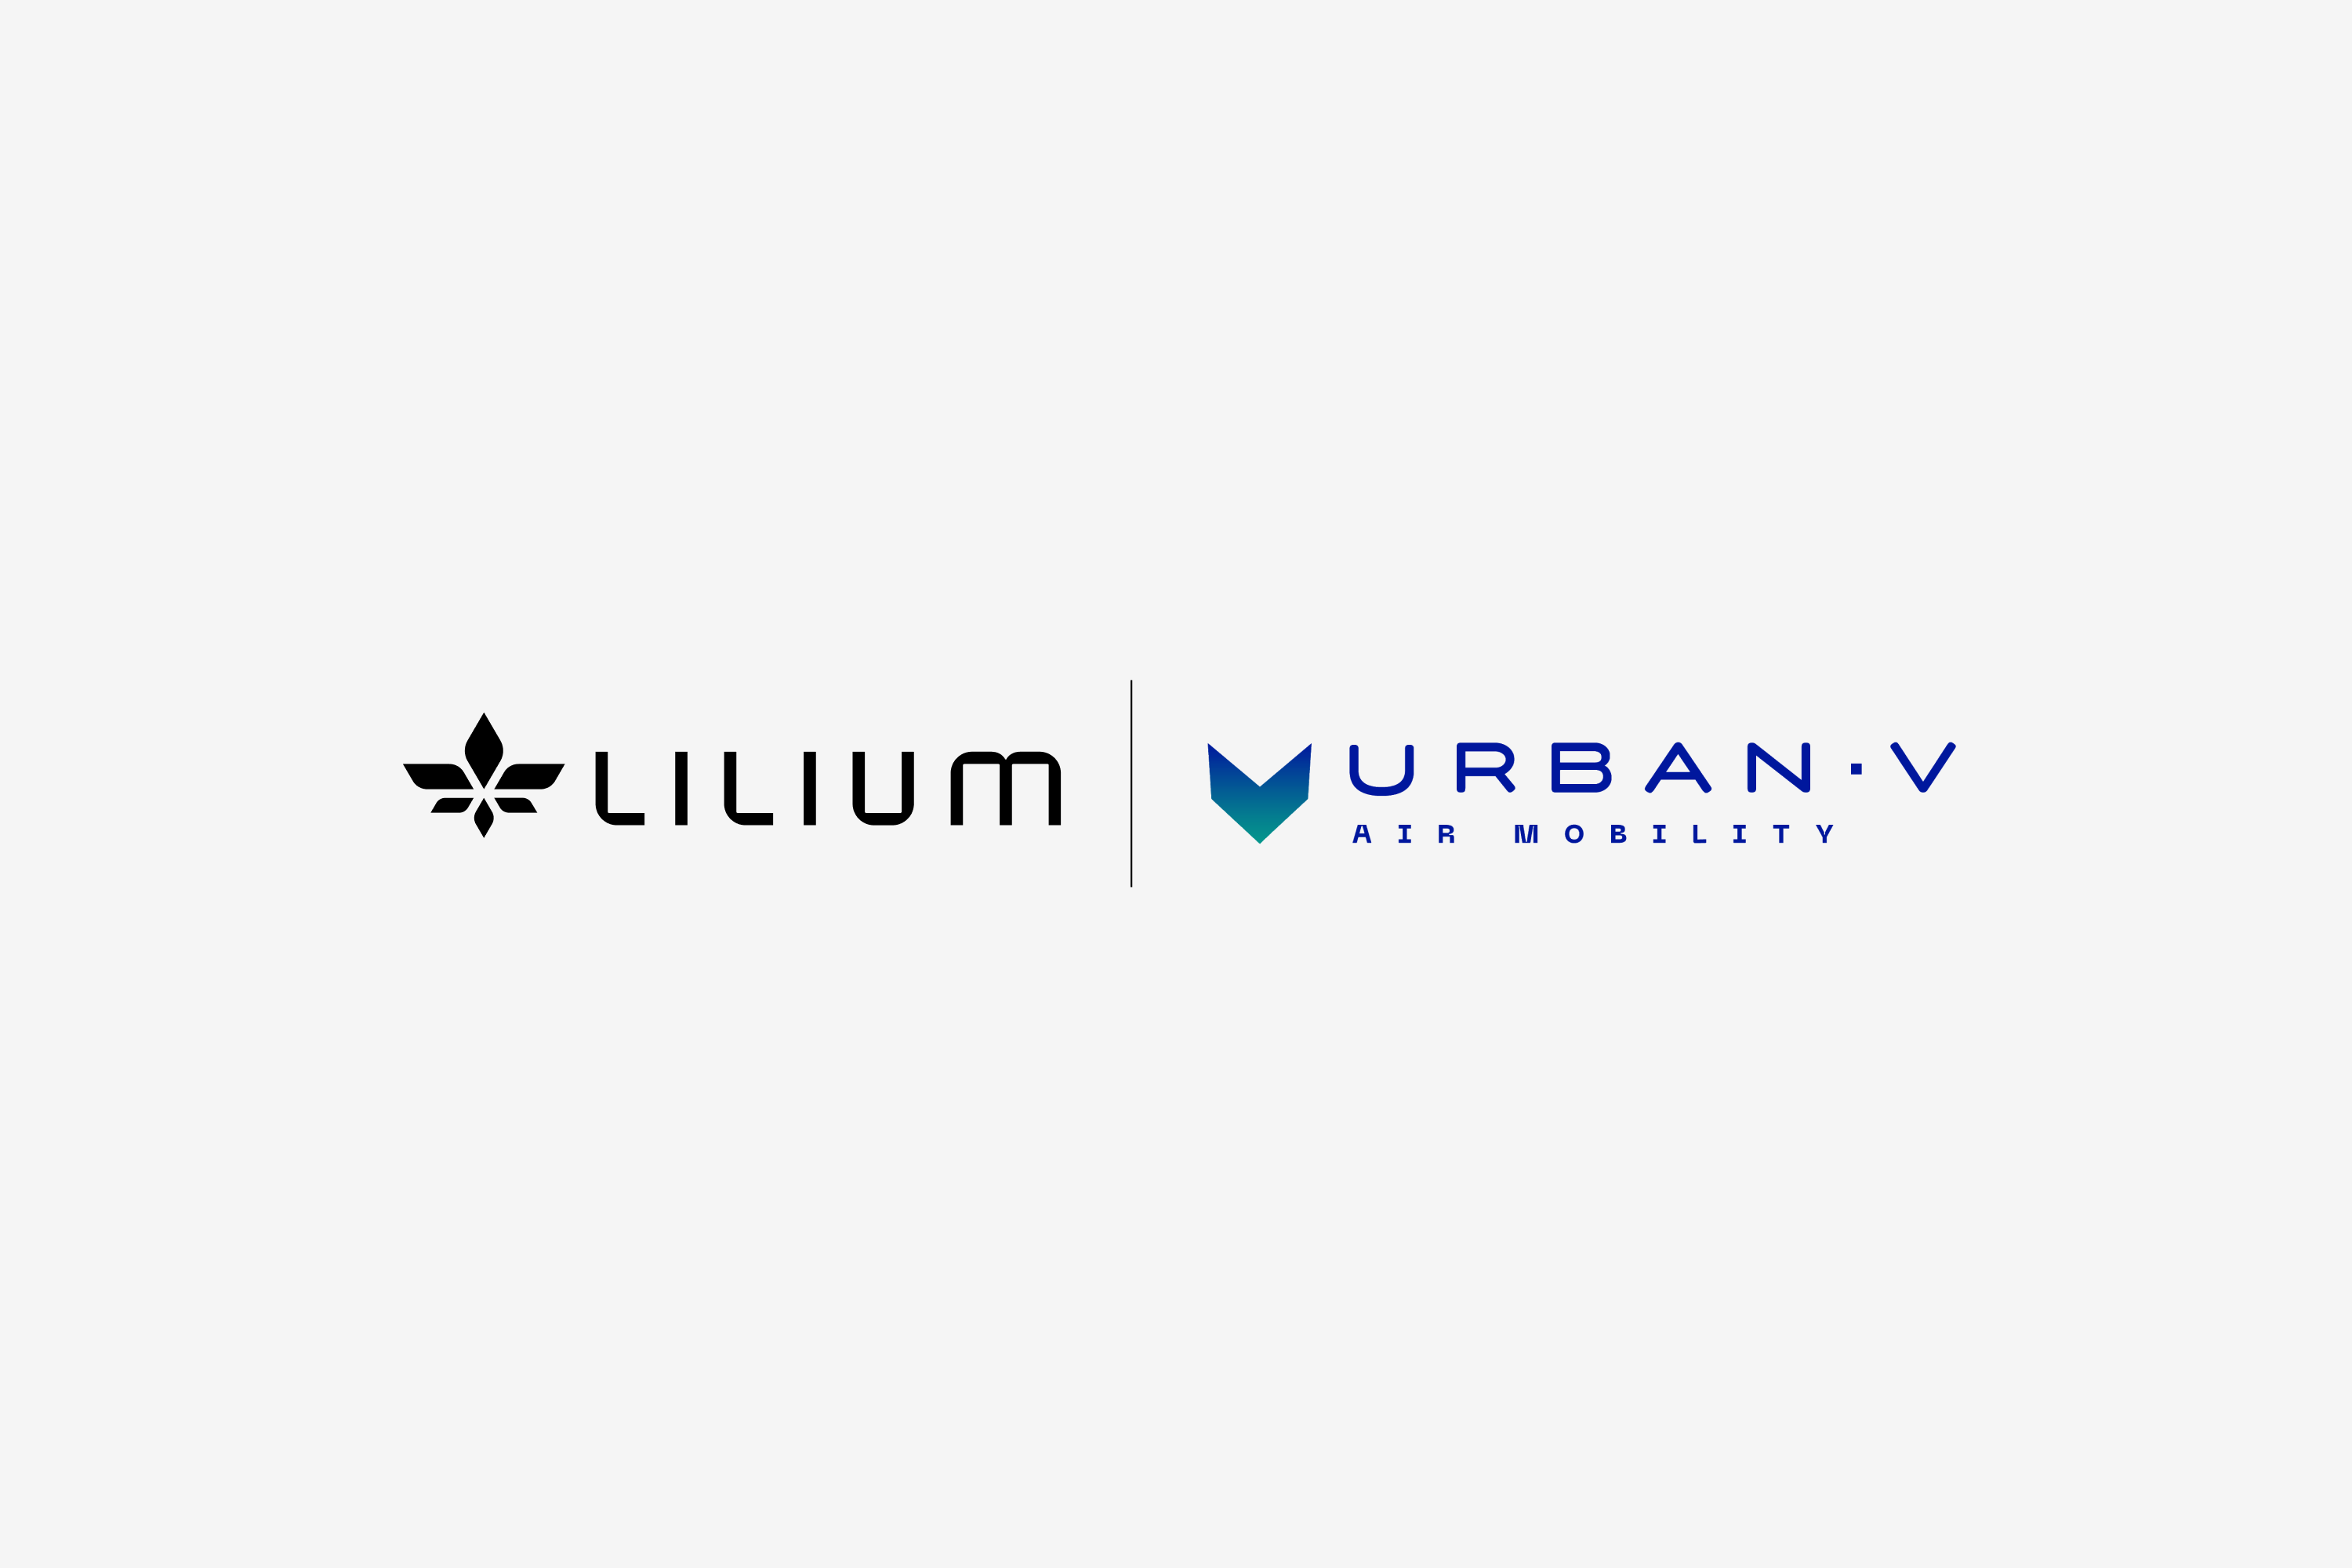 Lilium and UrbanV to collaborate on vertiports in Italy, the French Riviera and beyond 